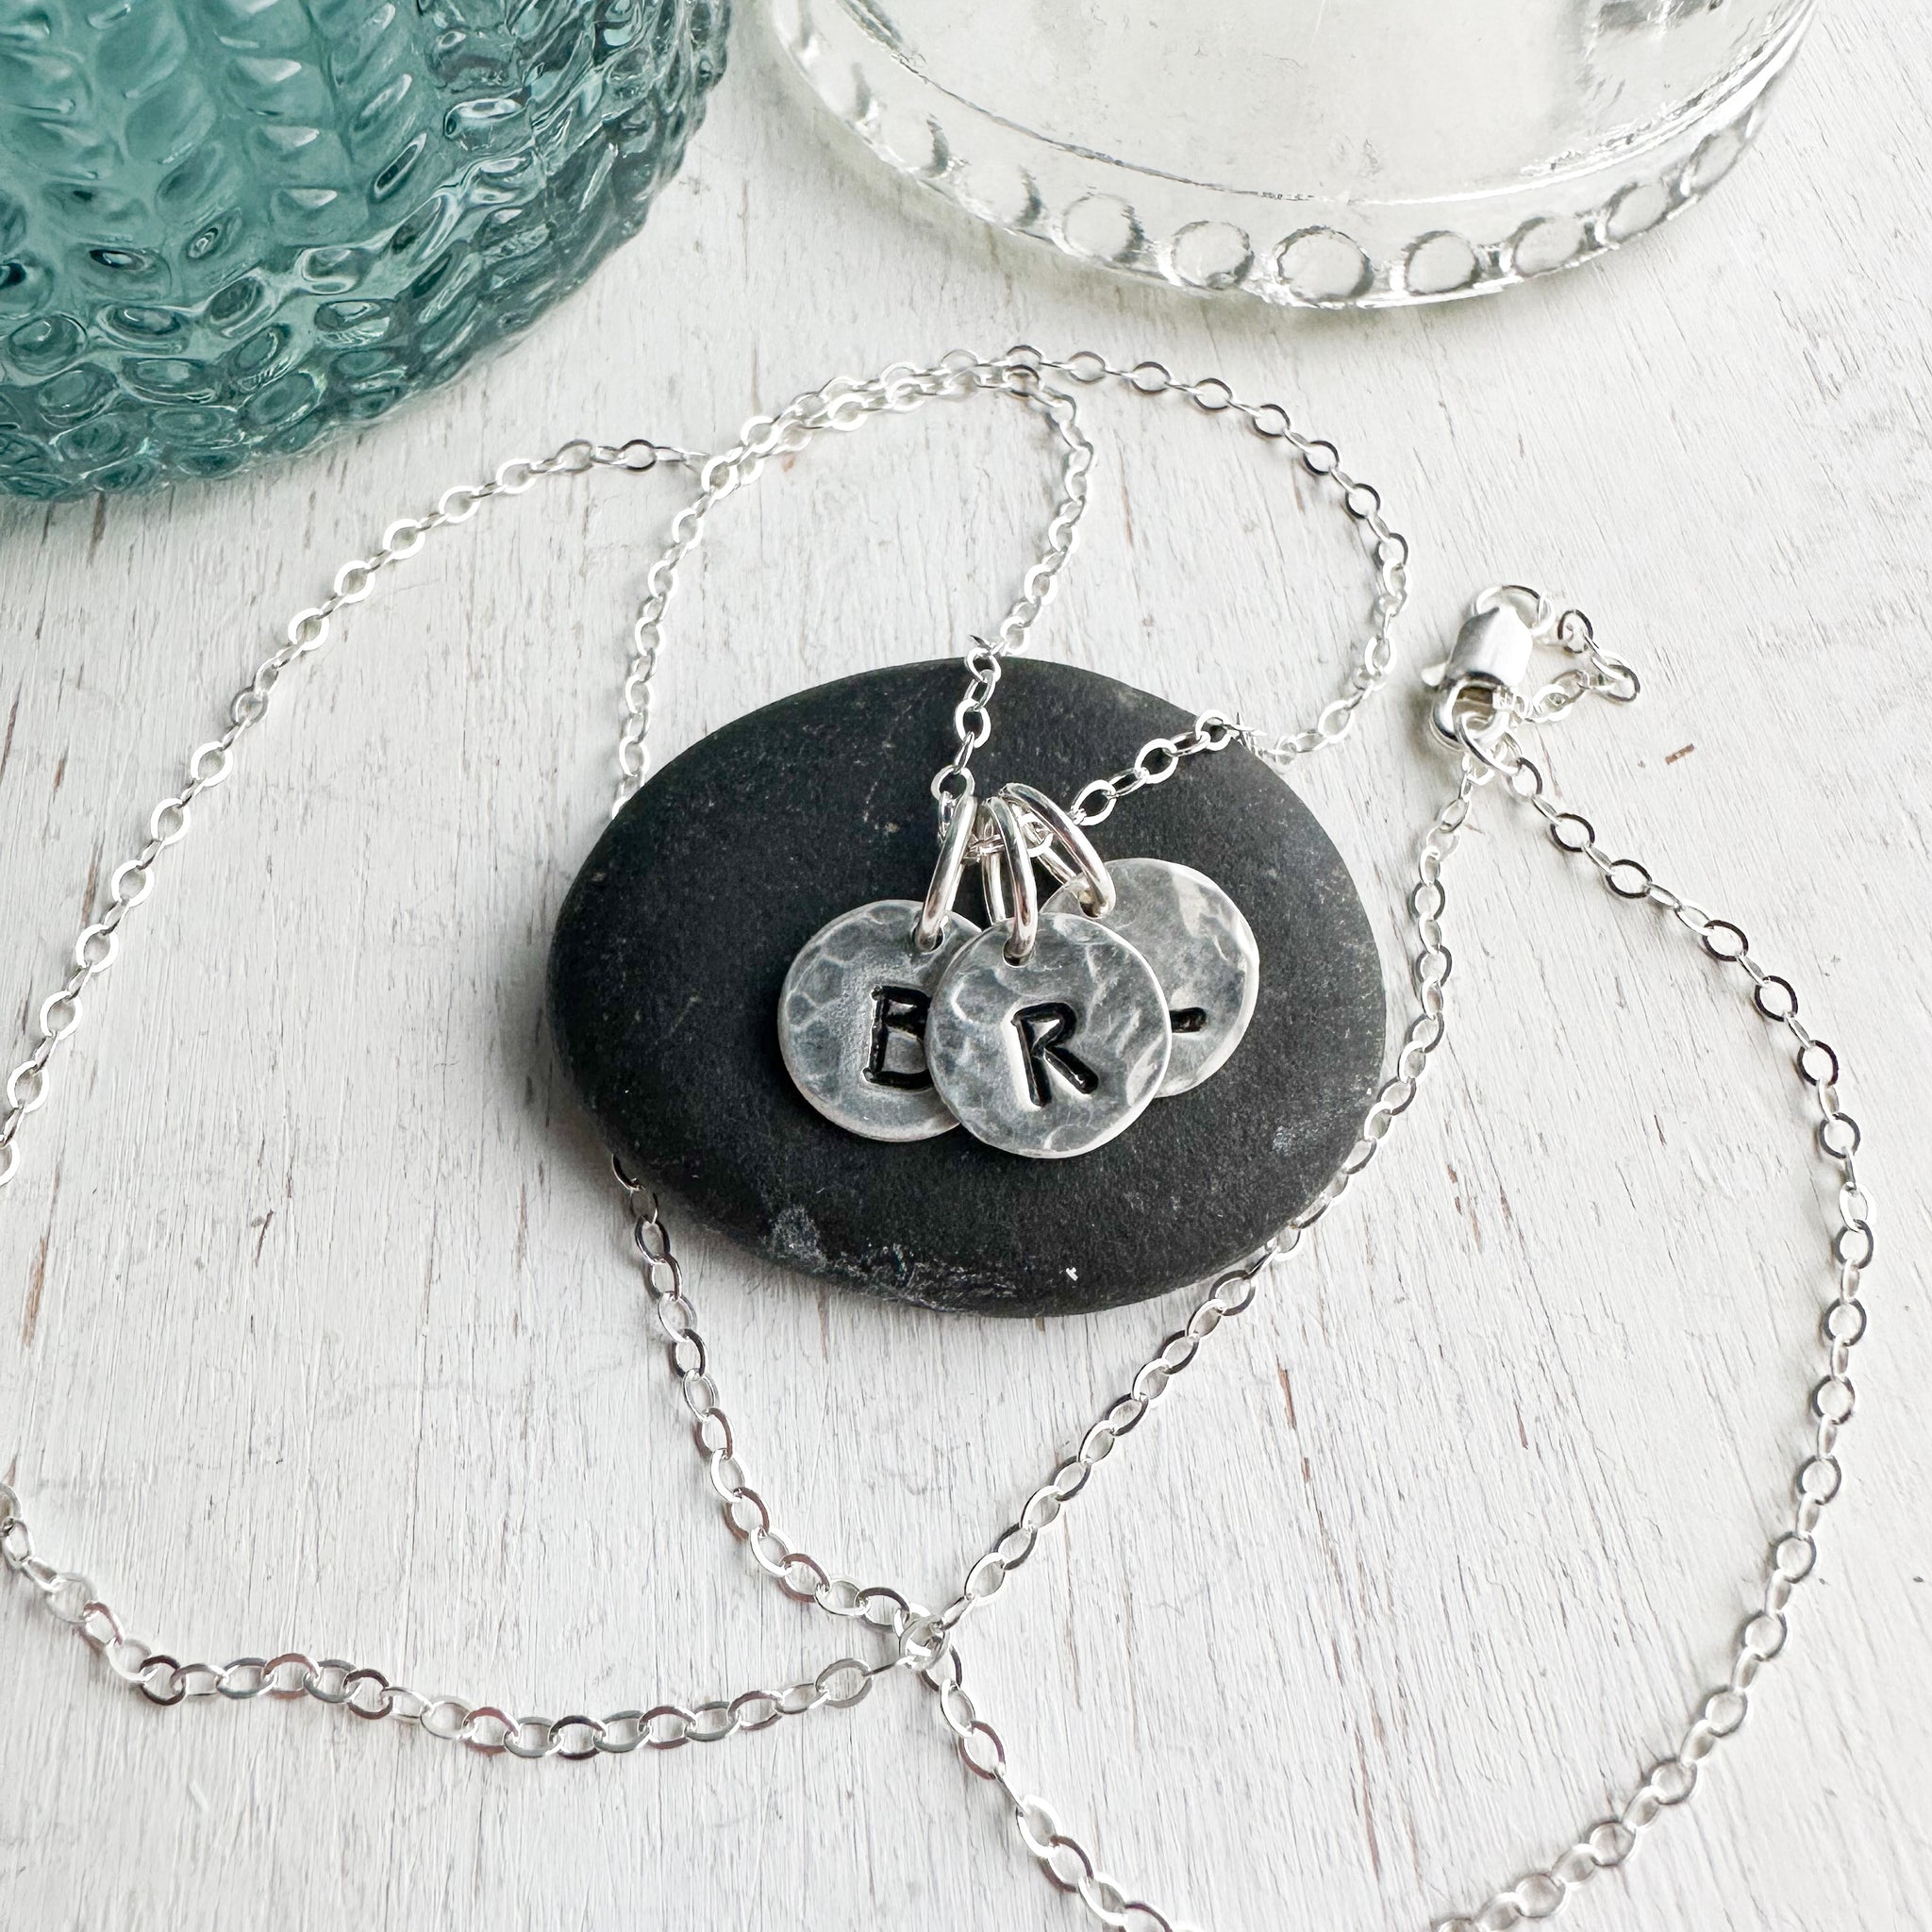 Stamped Sterling Silver Initial Charm Necklace - 2- / 22 Inches